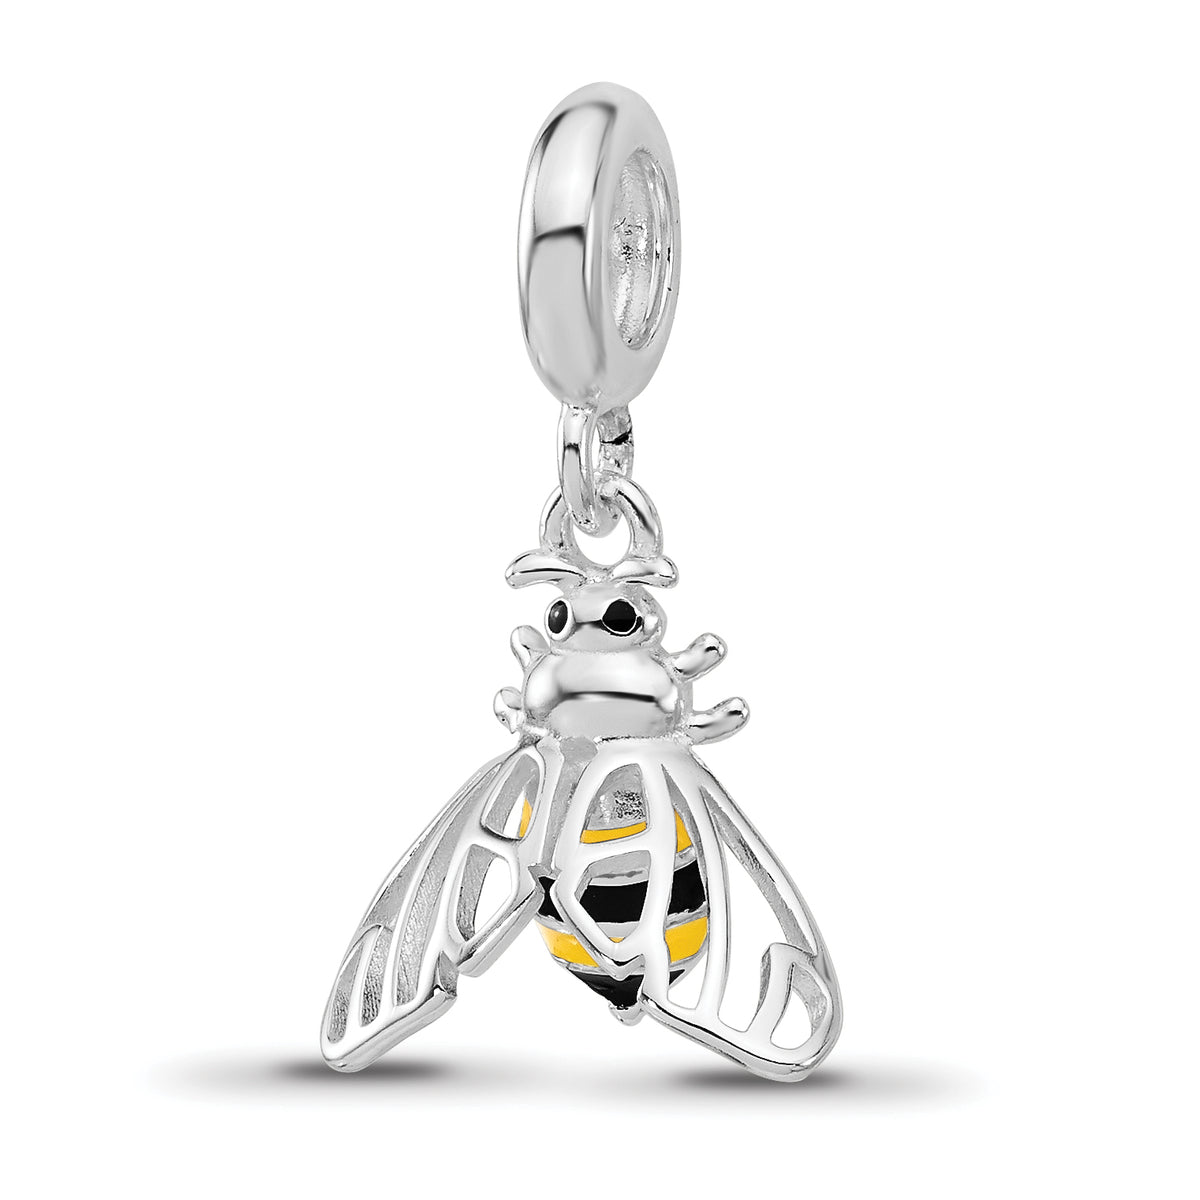 Sterling Silver Reflections Rh-plated Enameled Bee Dangle Bead